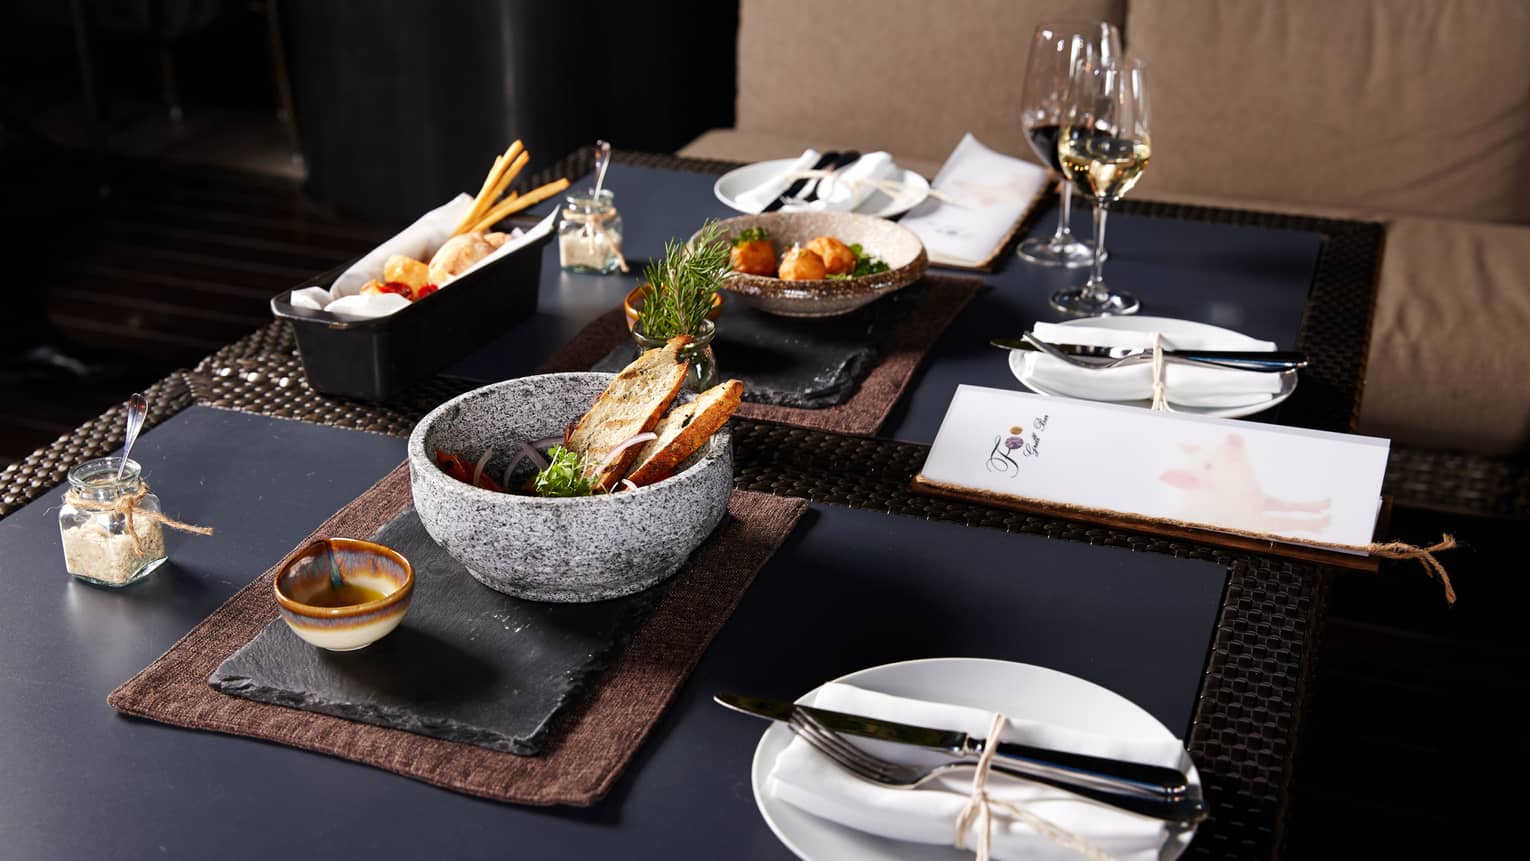 Foo dining table slate platters, bowls with toasts, appetizers